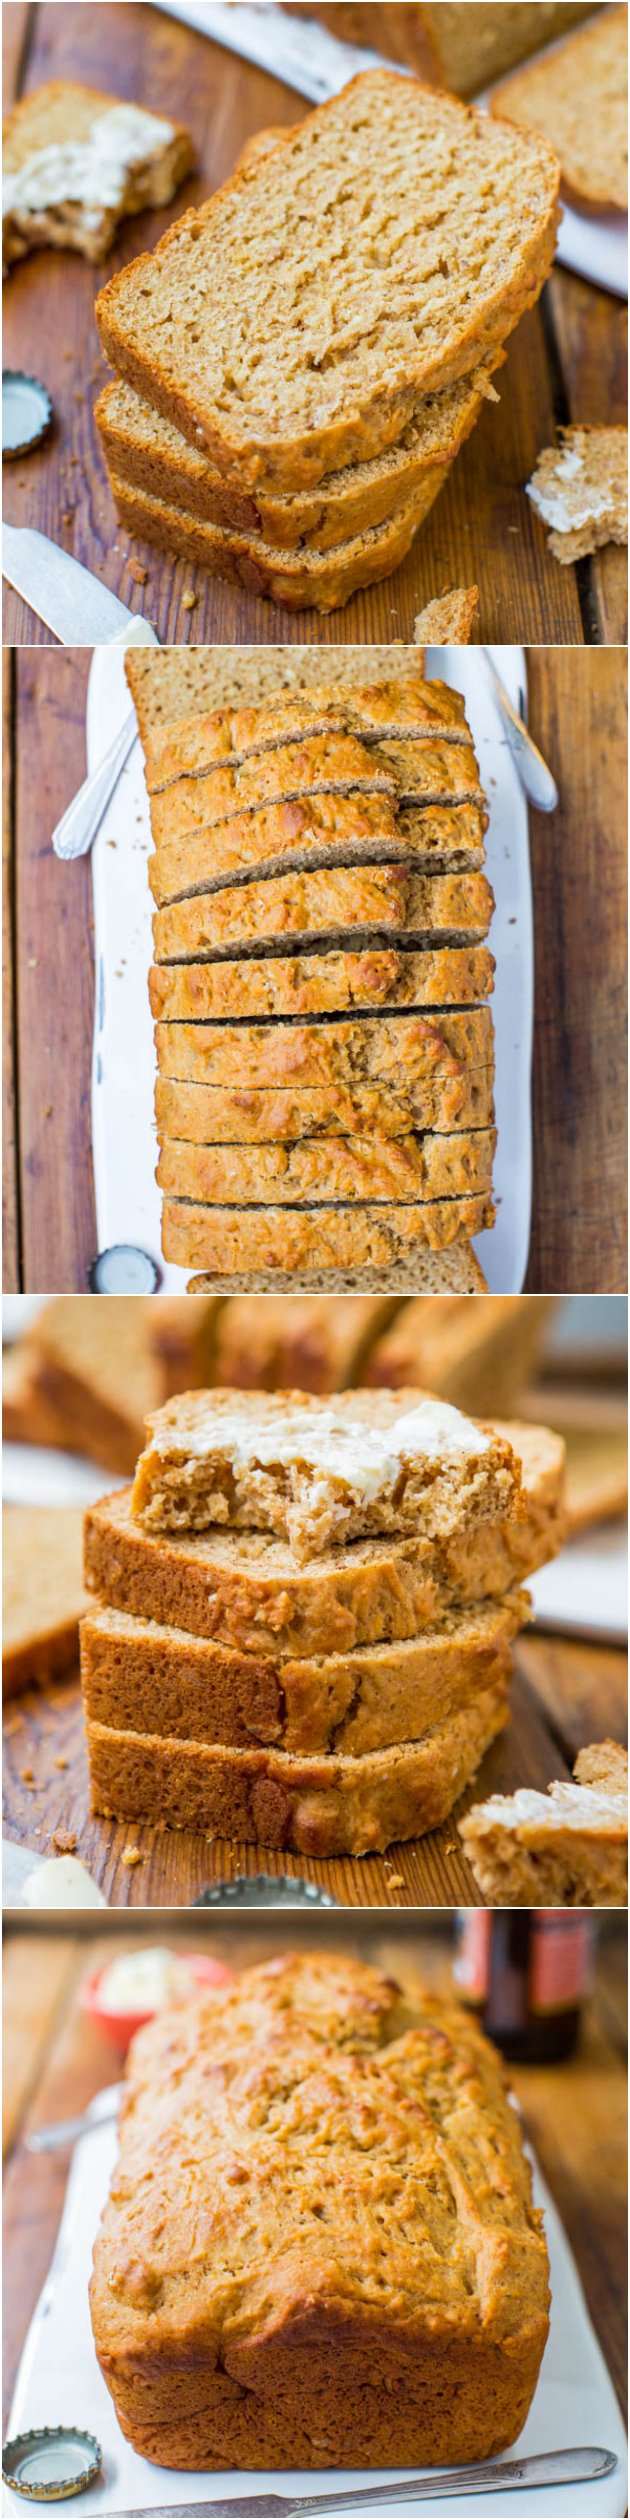 Honey Beer Bread - The easiest bread ever! No kneading, no yeast, and guaranteed soft and fluffy results every time!